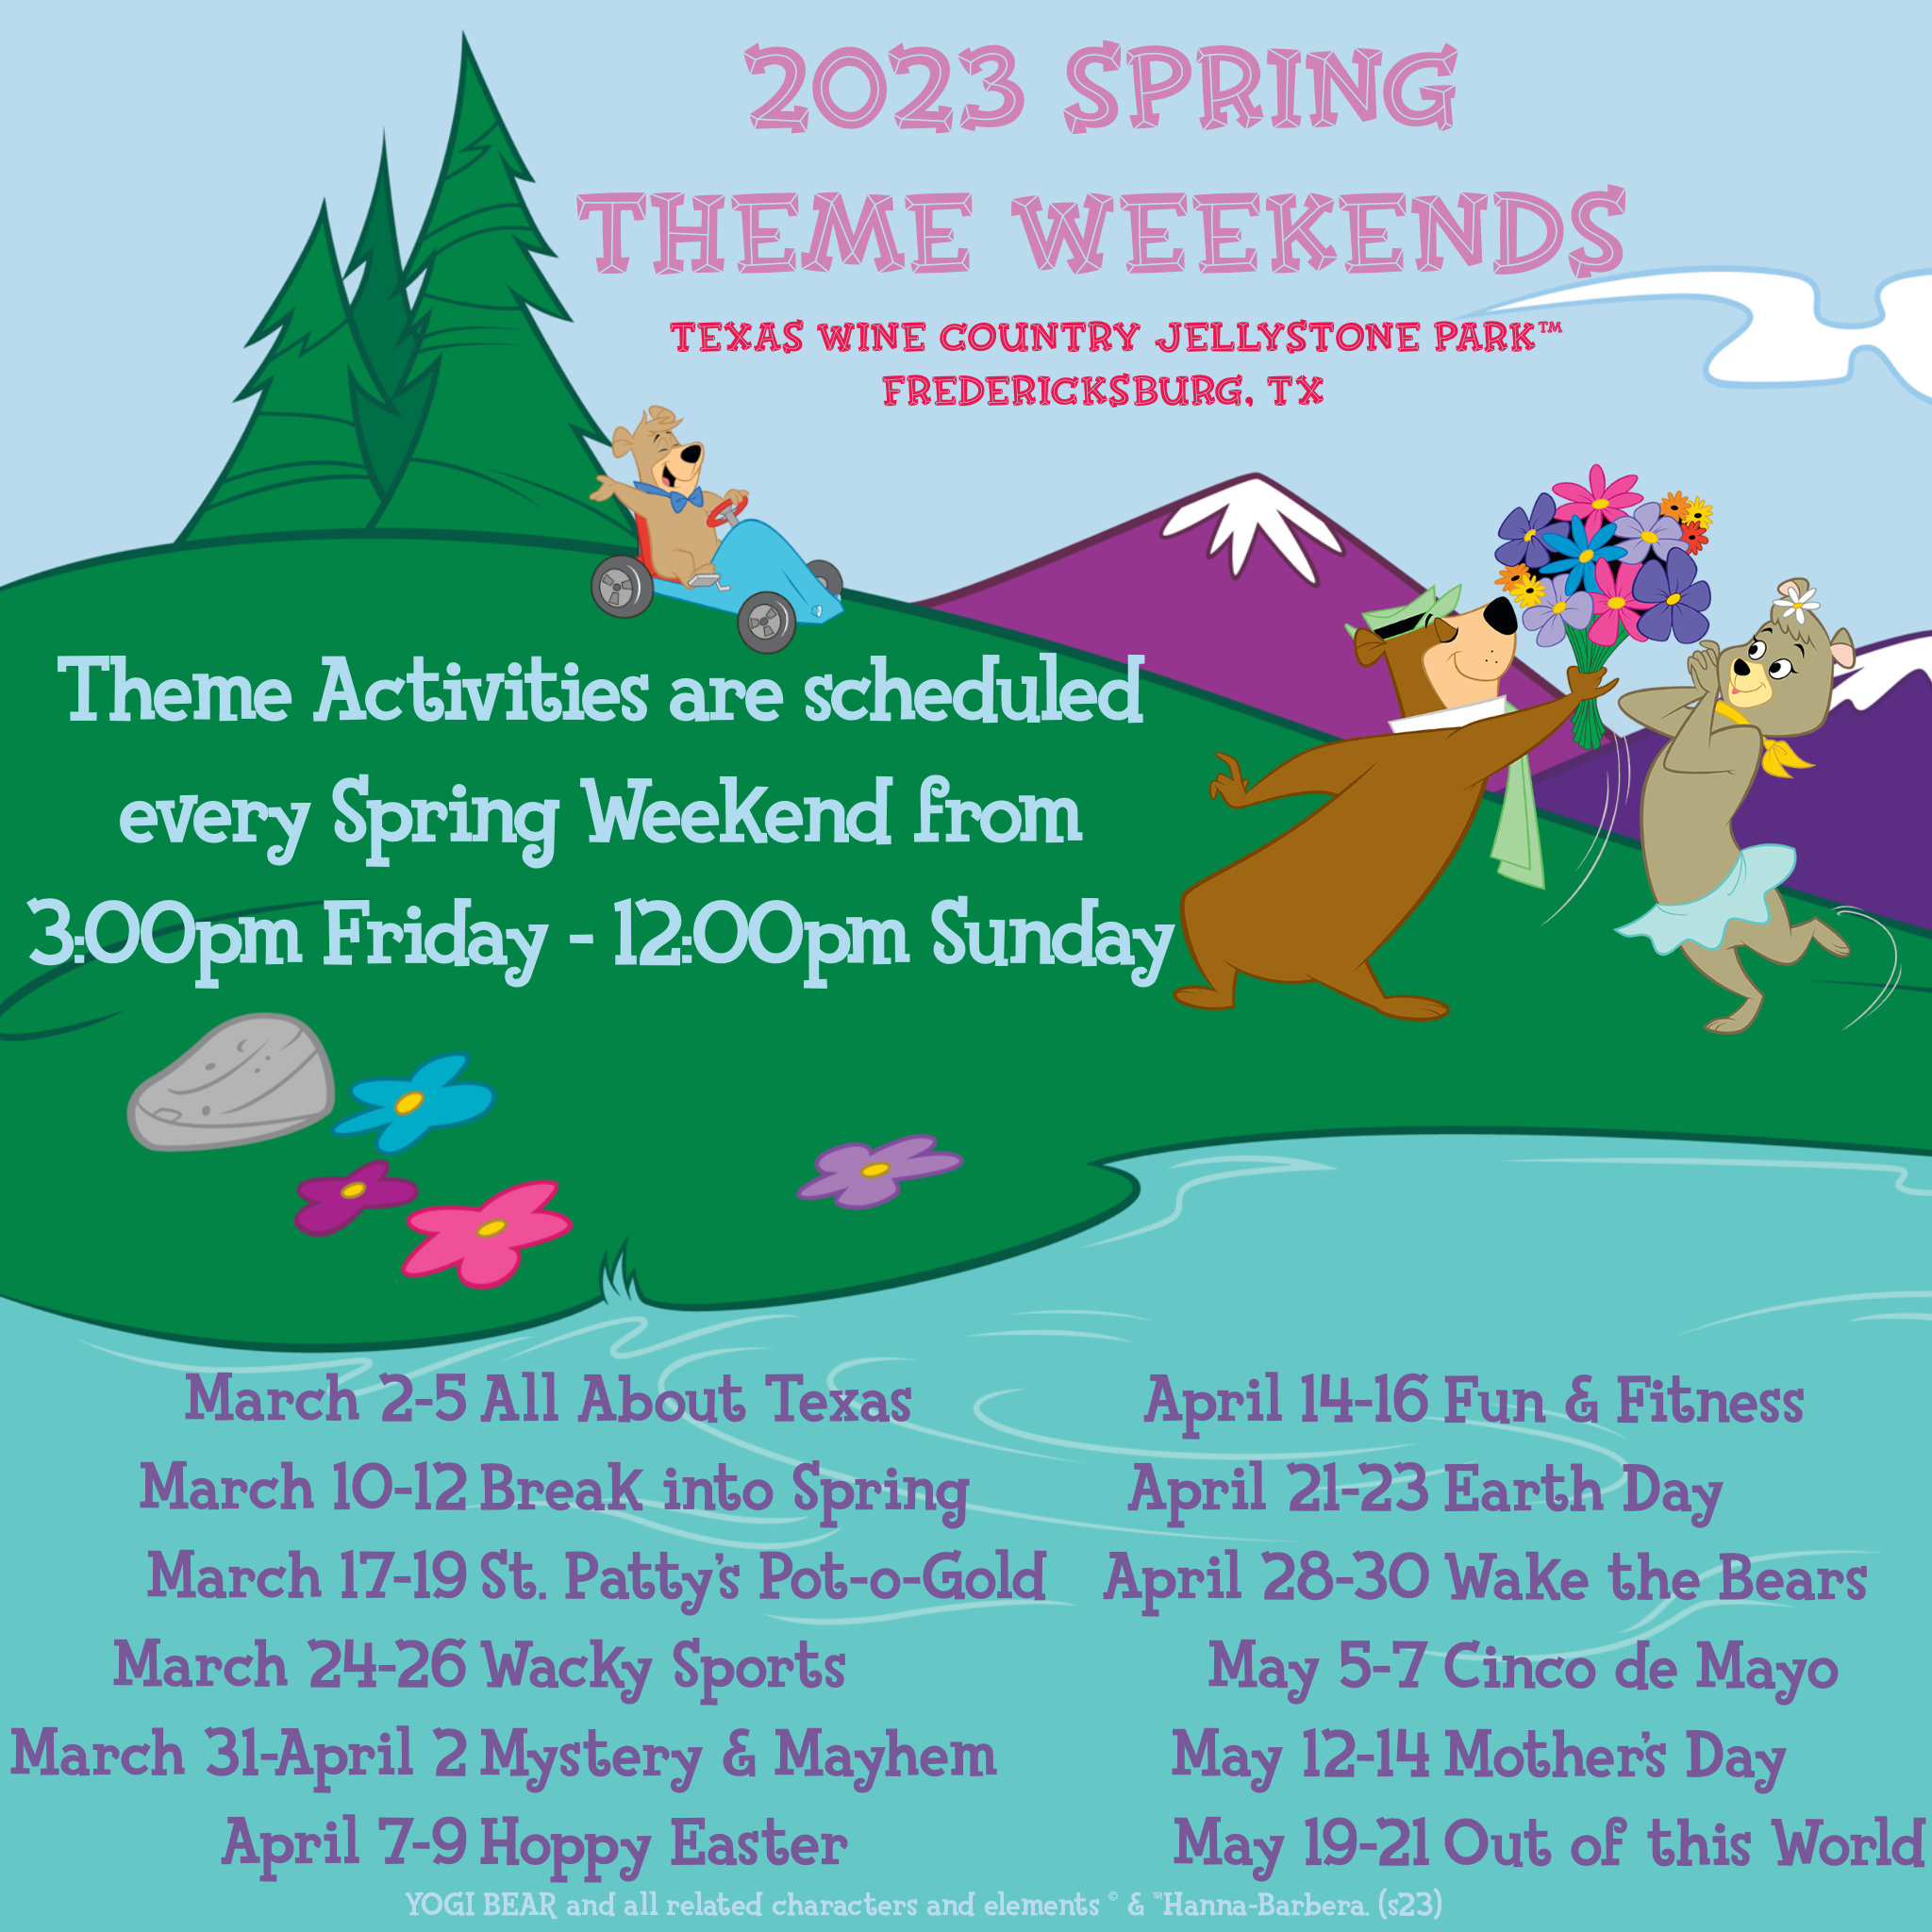 2023 Spring Theme Weekends List